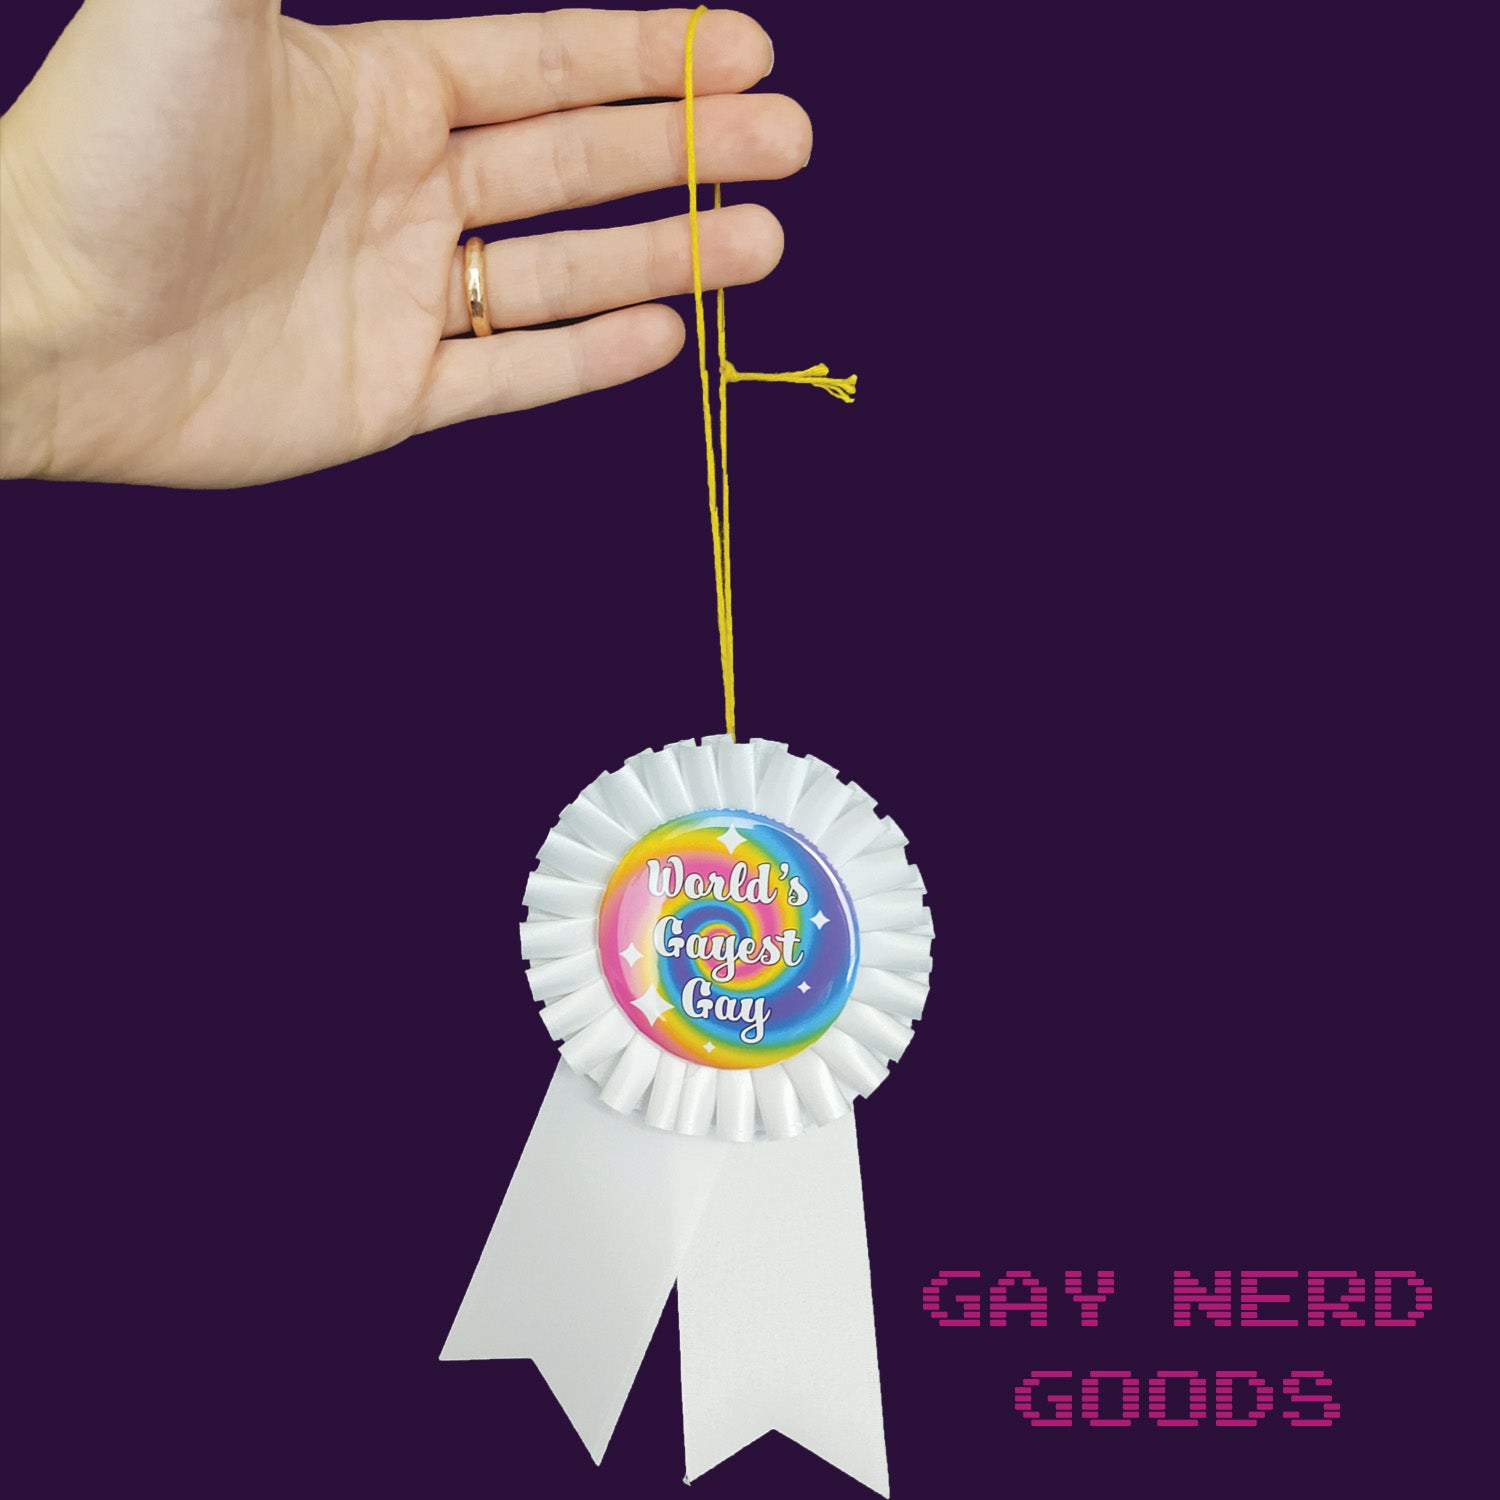 world's gayest gay award being held by a thread loop held by a hand